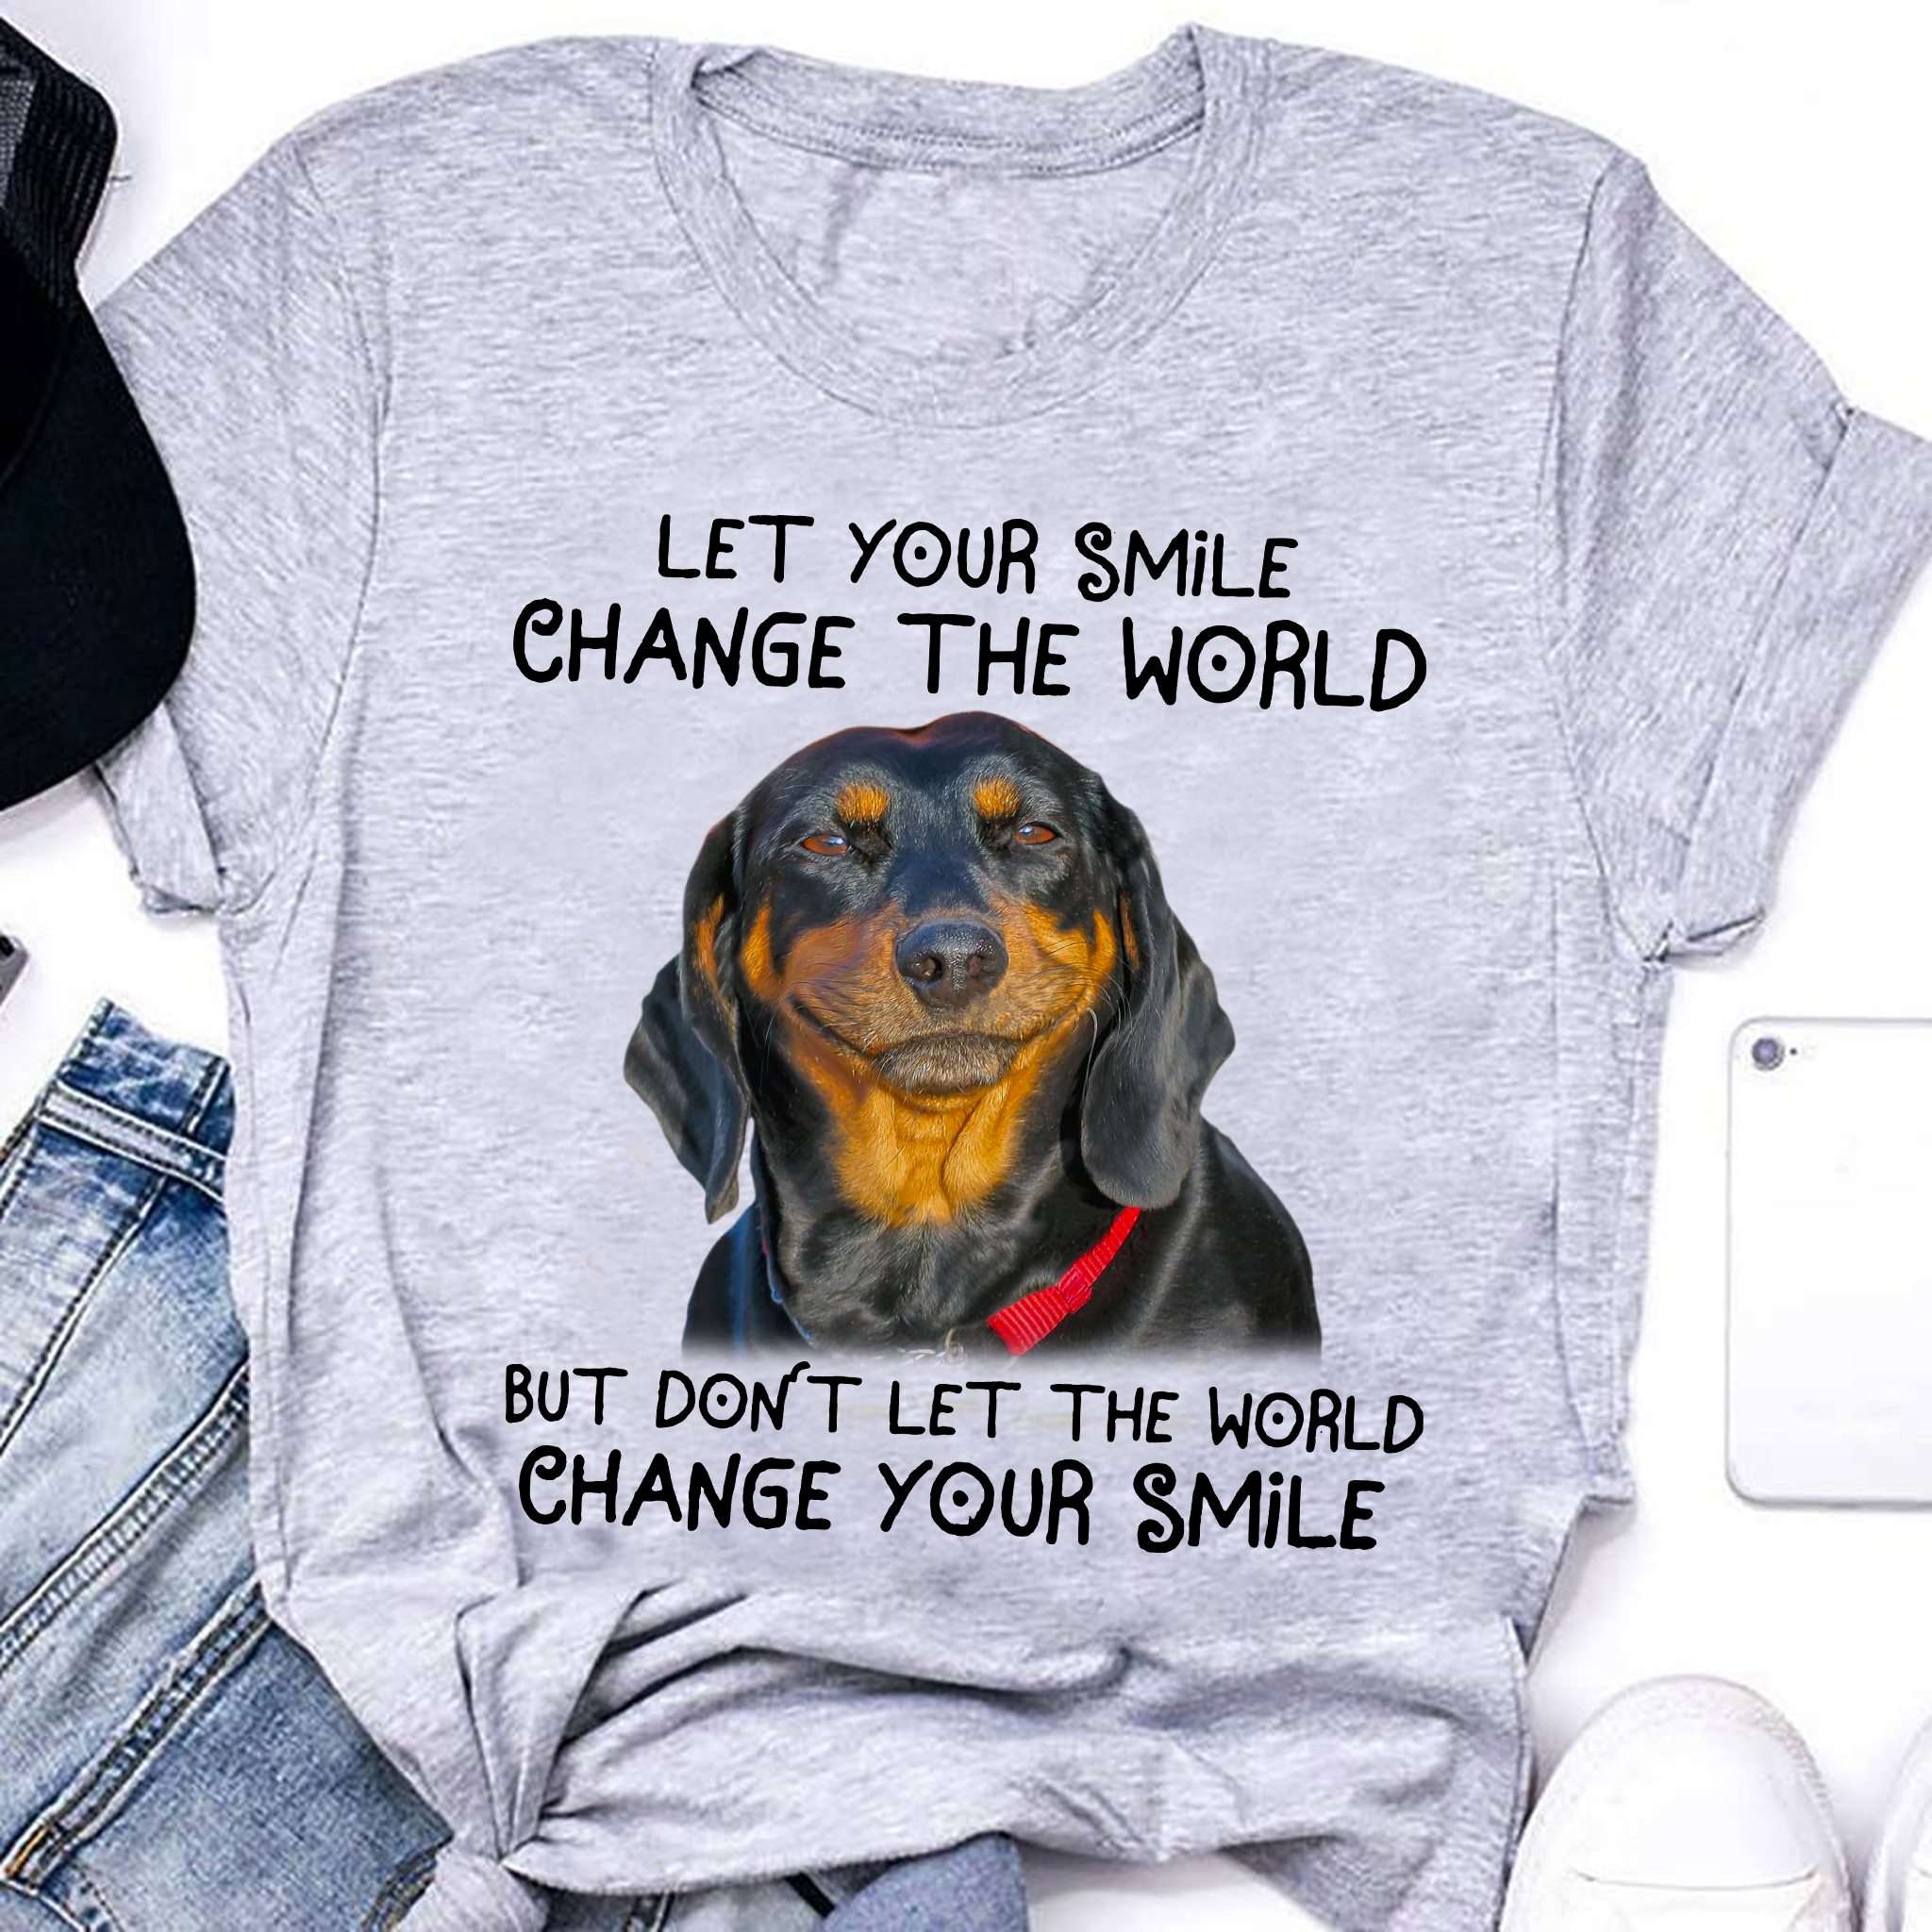 Let your smile change the world but don't let the world change your smile - Smiling Rottweiler dog